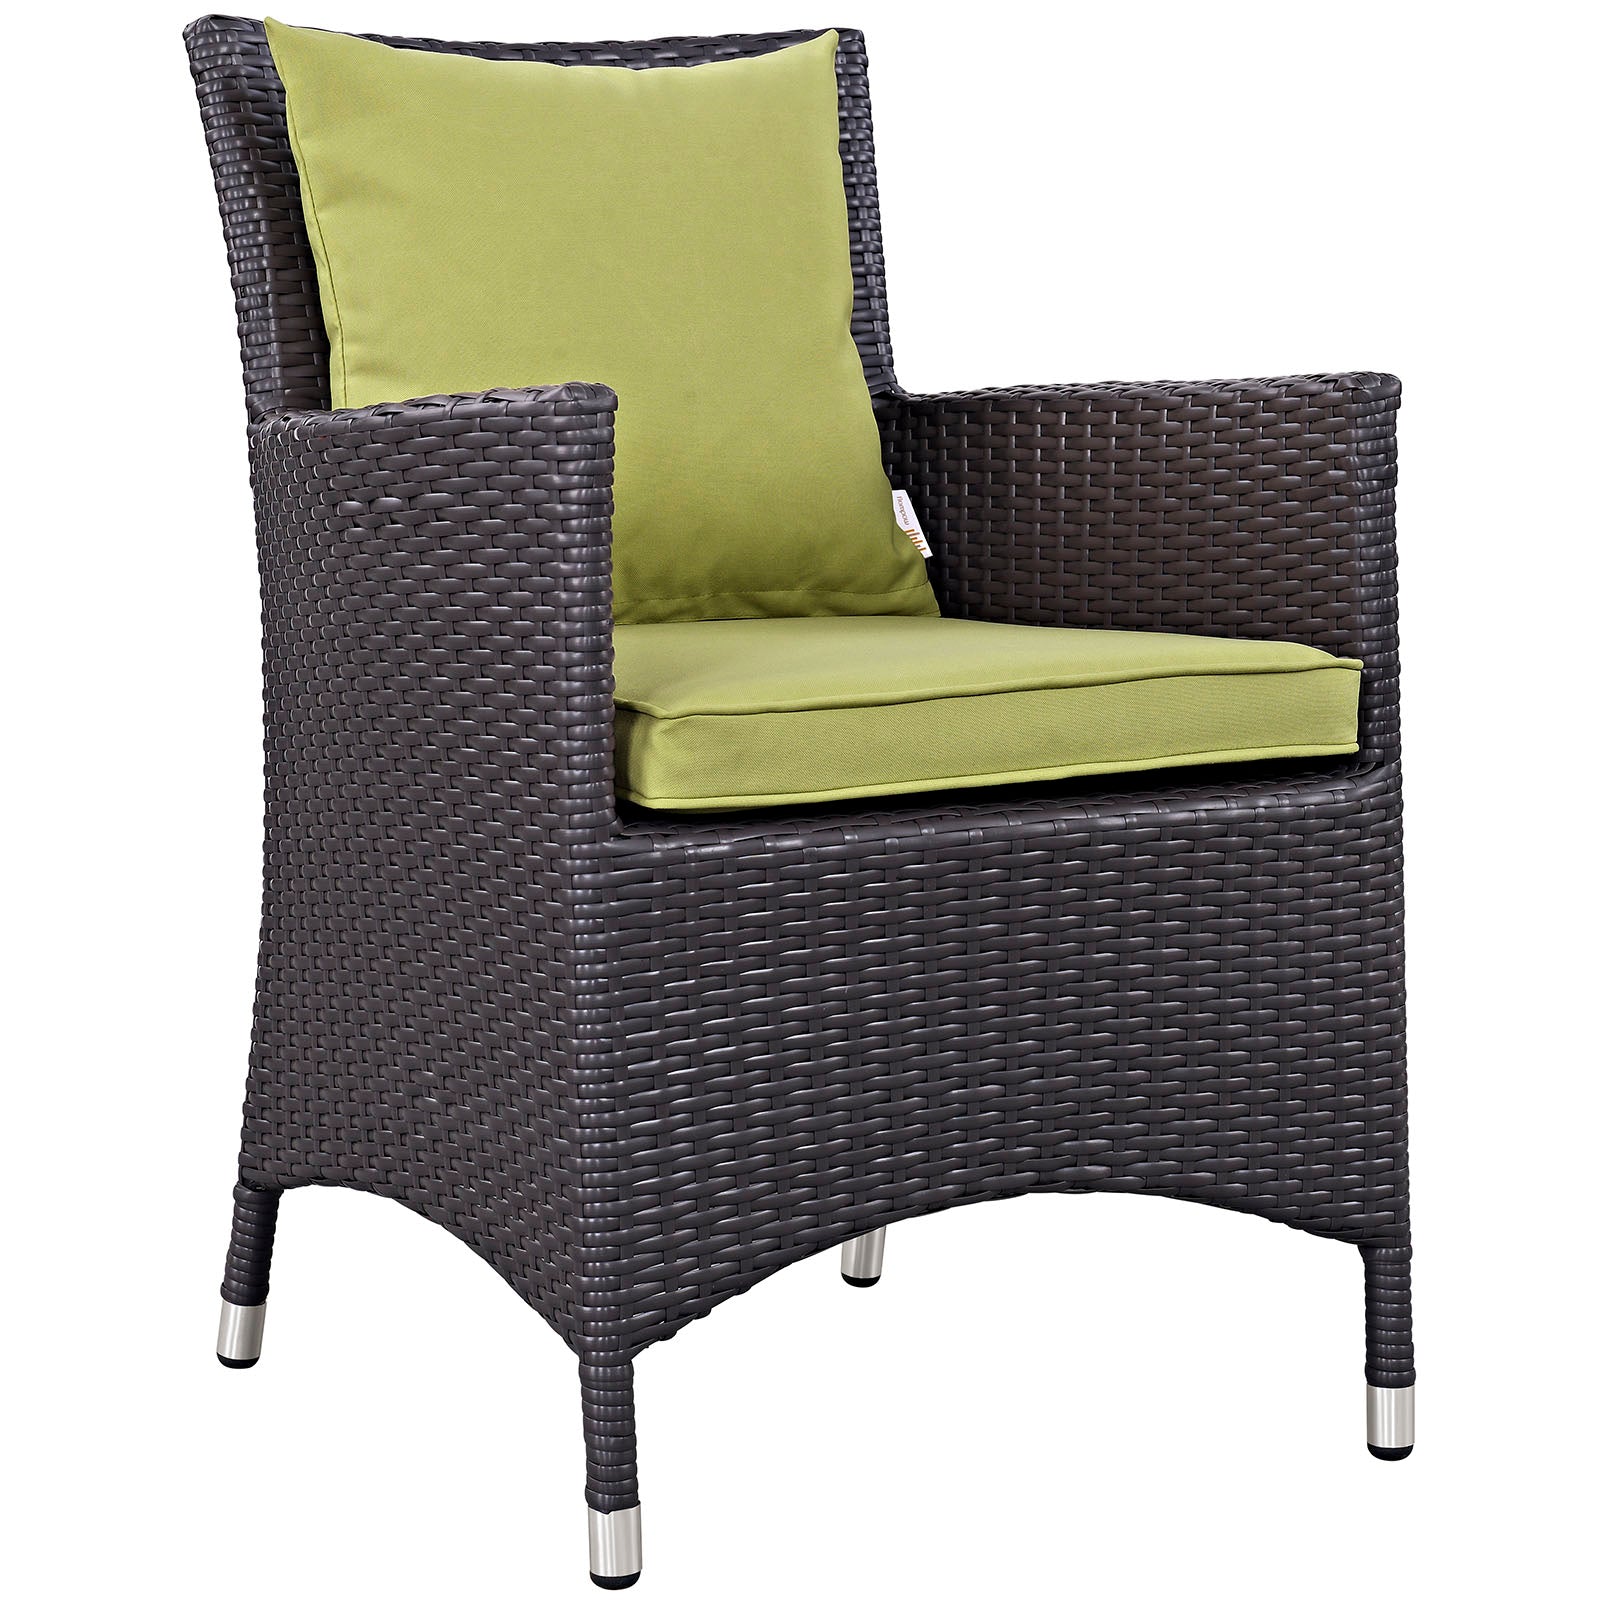 Modway Outdoor Dining Chairs - Convene Dining Outdoor Patio Armchair Espresso Peridot